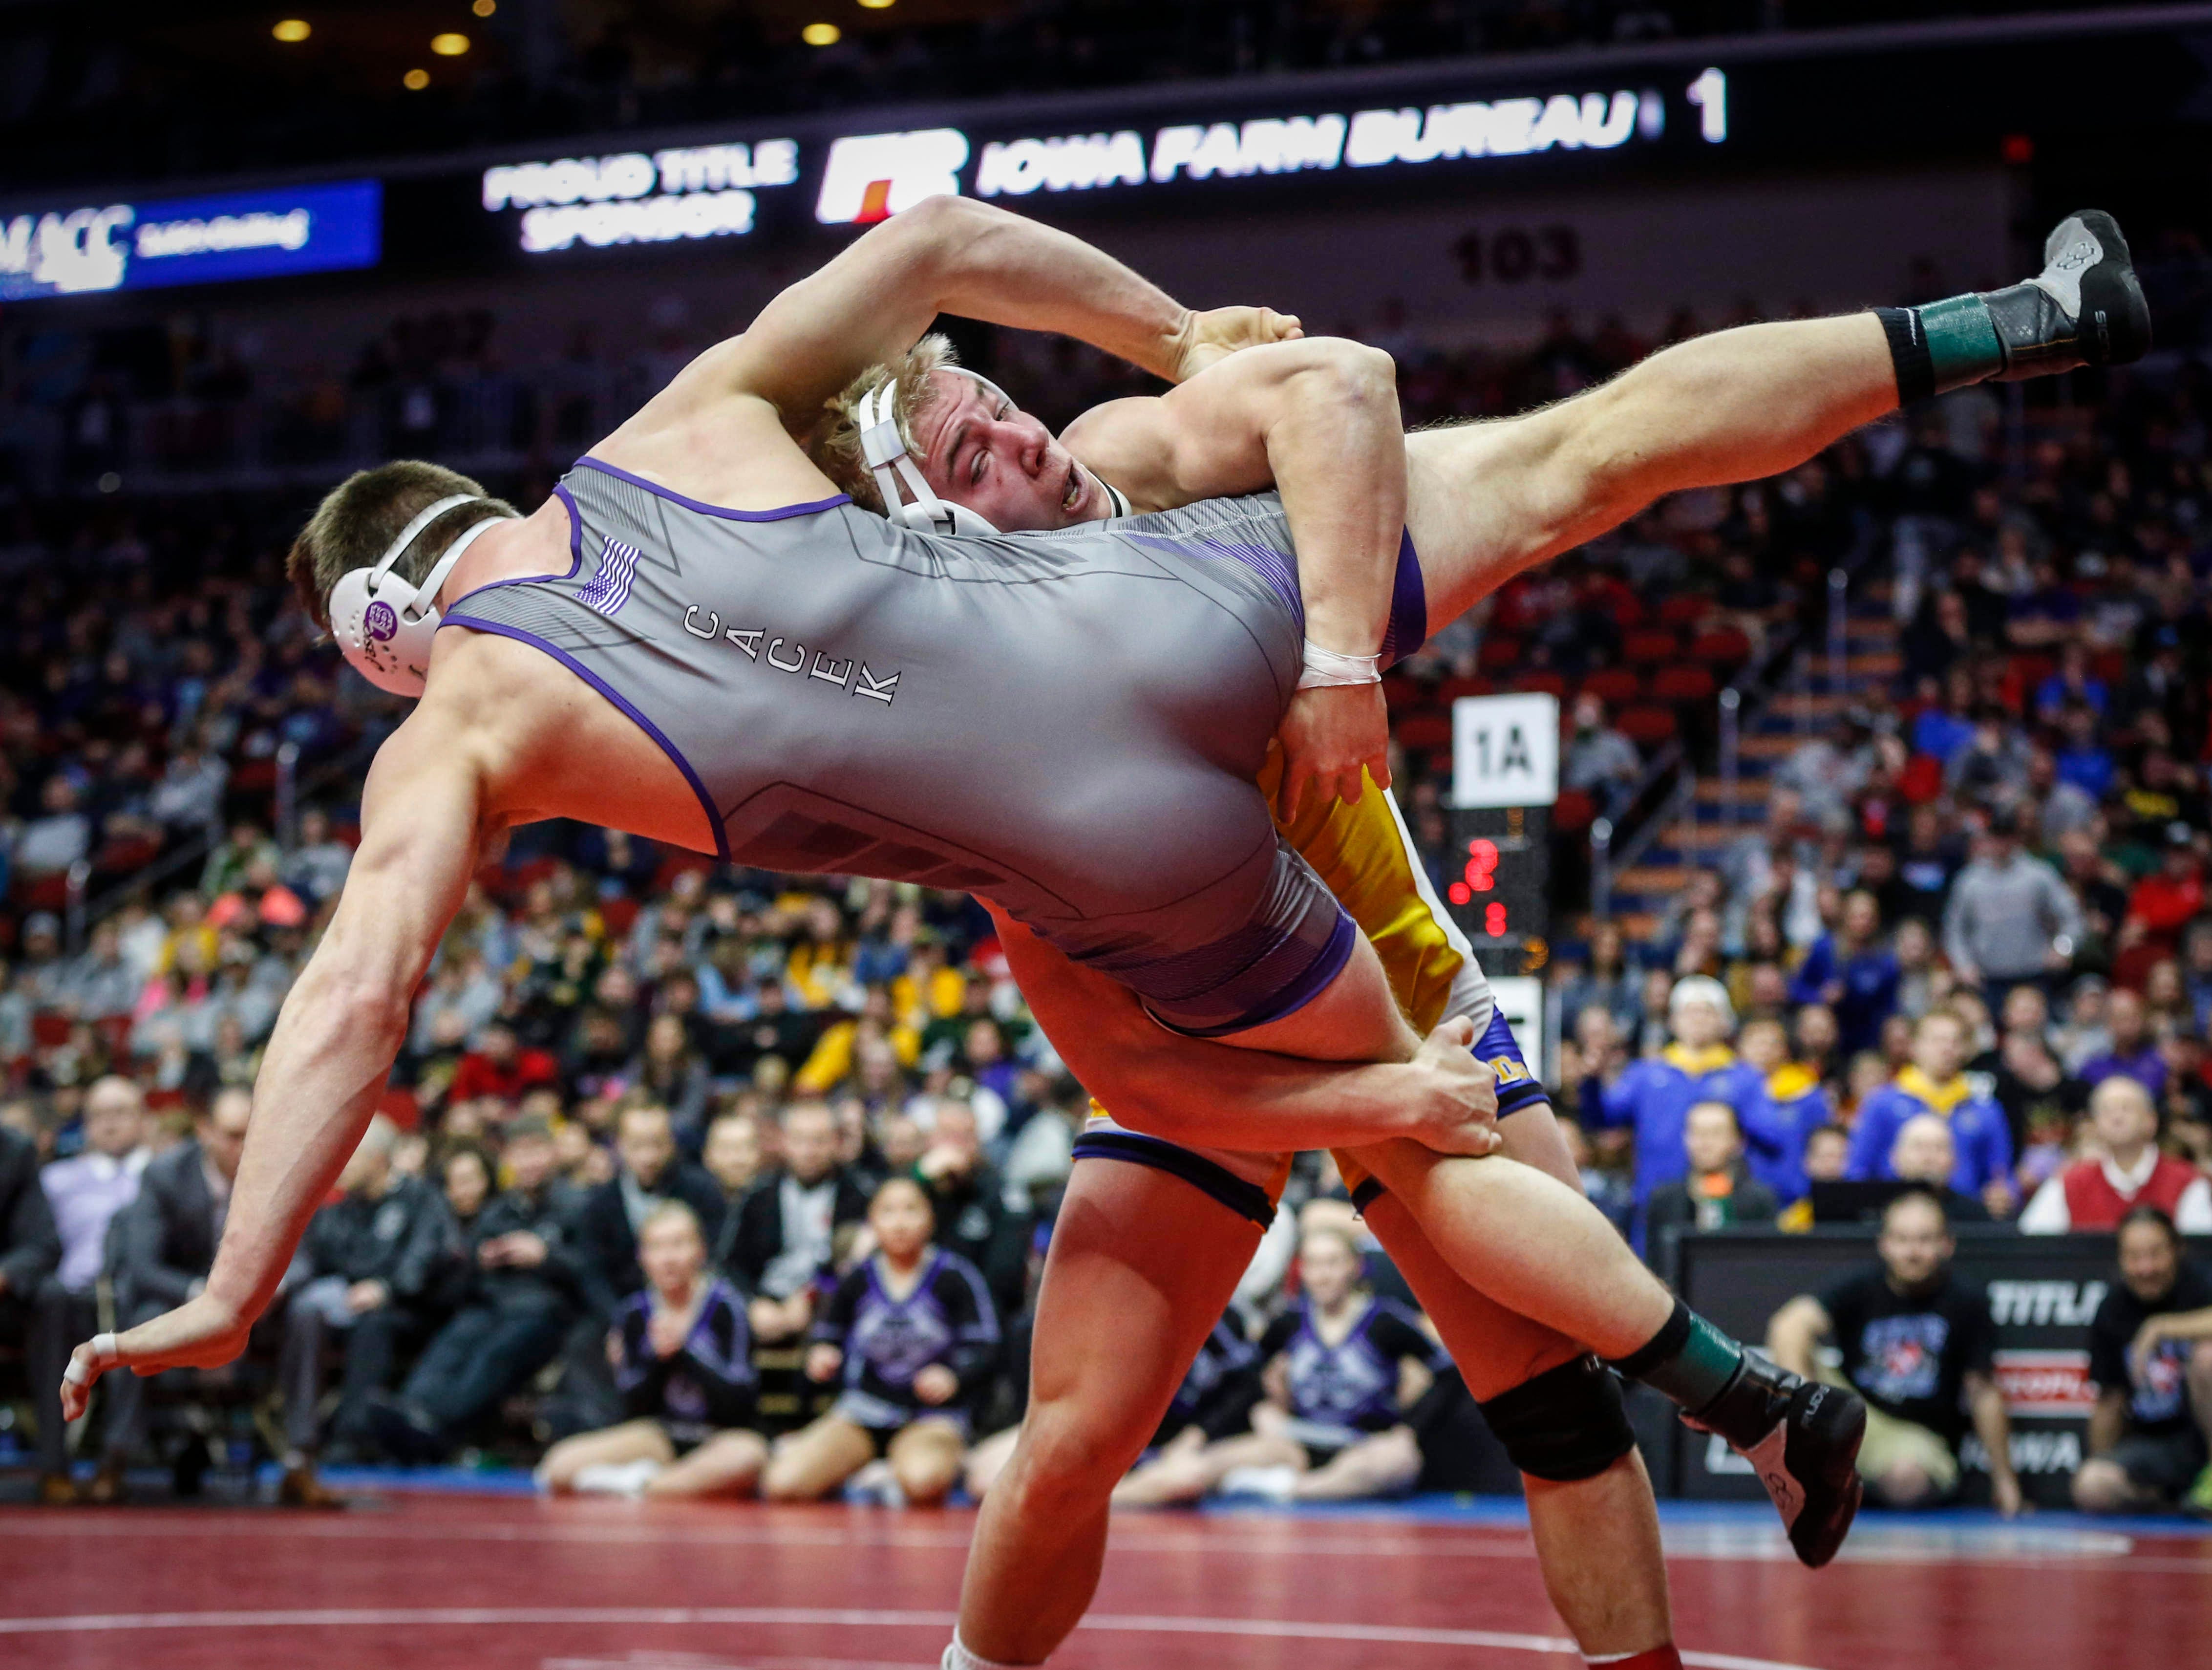 Here is every firstround matchup for Iowa's state wrestling championships